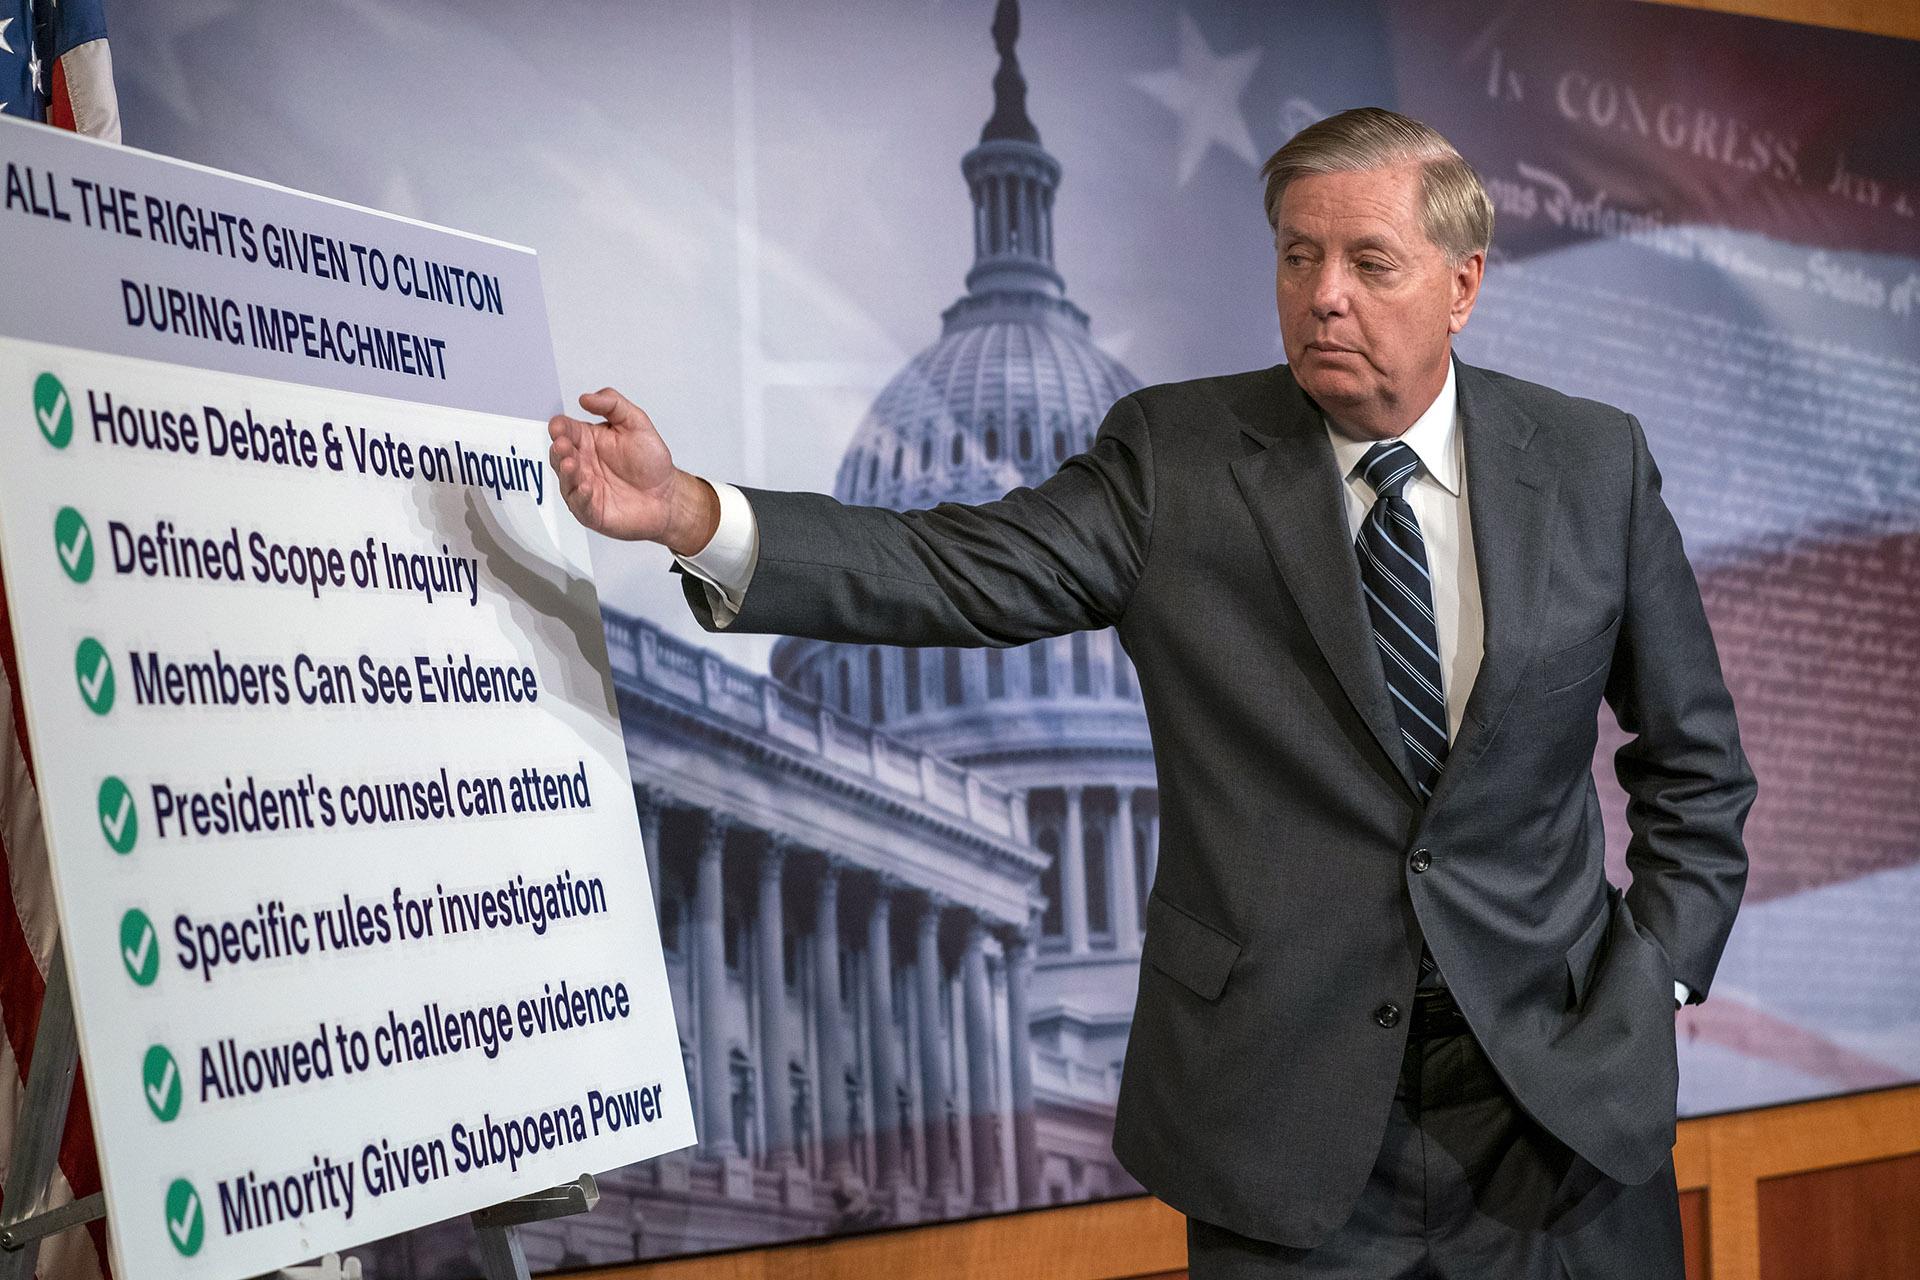 Sen. Lindsey Graham, R-S.C., speaks about a resolution he says he will introduce condemning the Democratic-controlled House for pursuing a “closed door, illegitimate impeachment inquiry,” during a news conference at the Capitol in Washington, Thursday, Oct. 24, 2019. (AP Photo / J. Scott Applewhite)